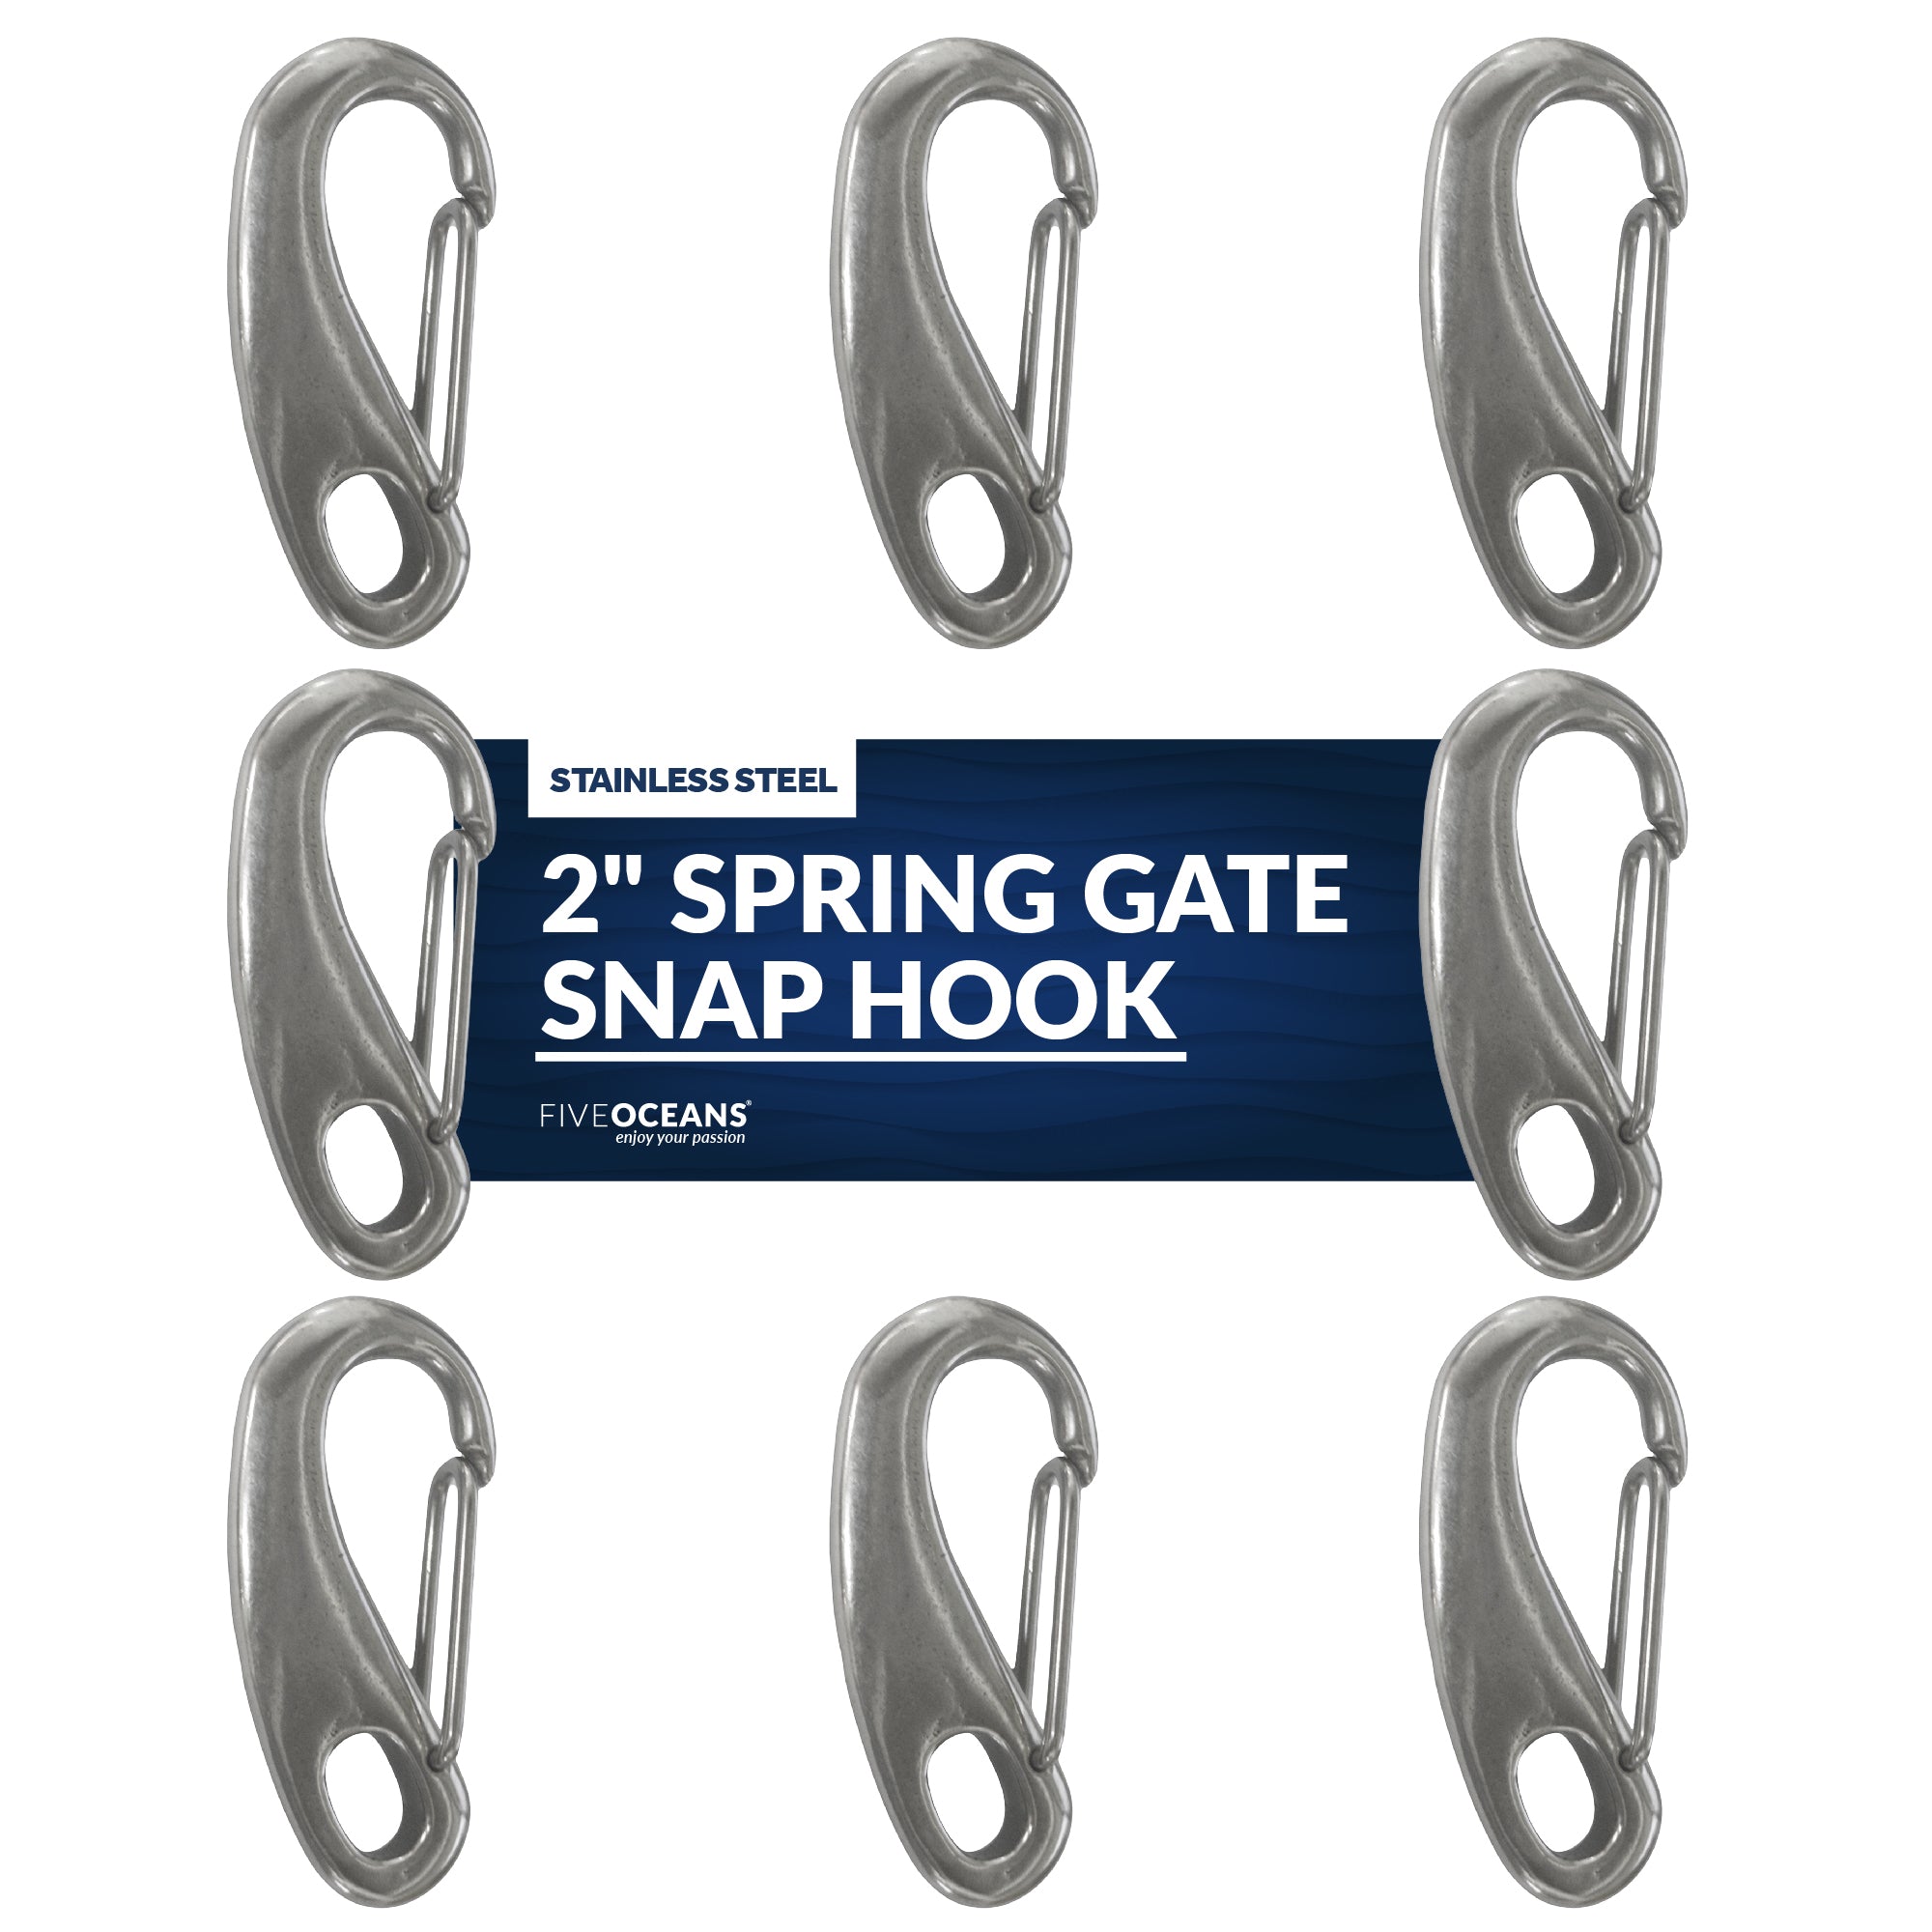 Spring Gate Snap Hook, 2" Stainless Steel 8-Pack - FO461-M8